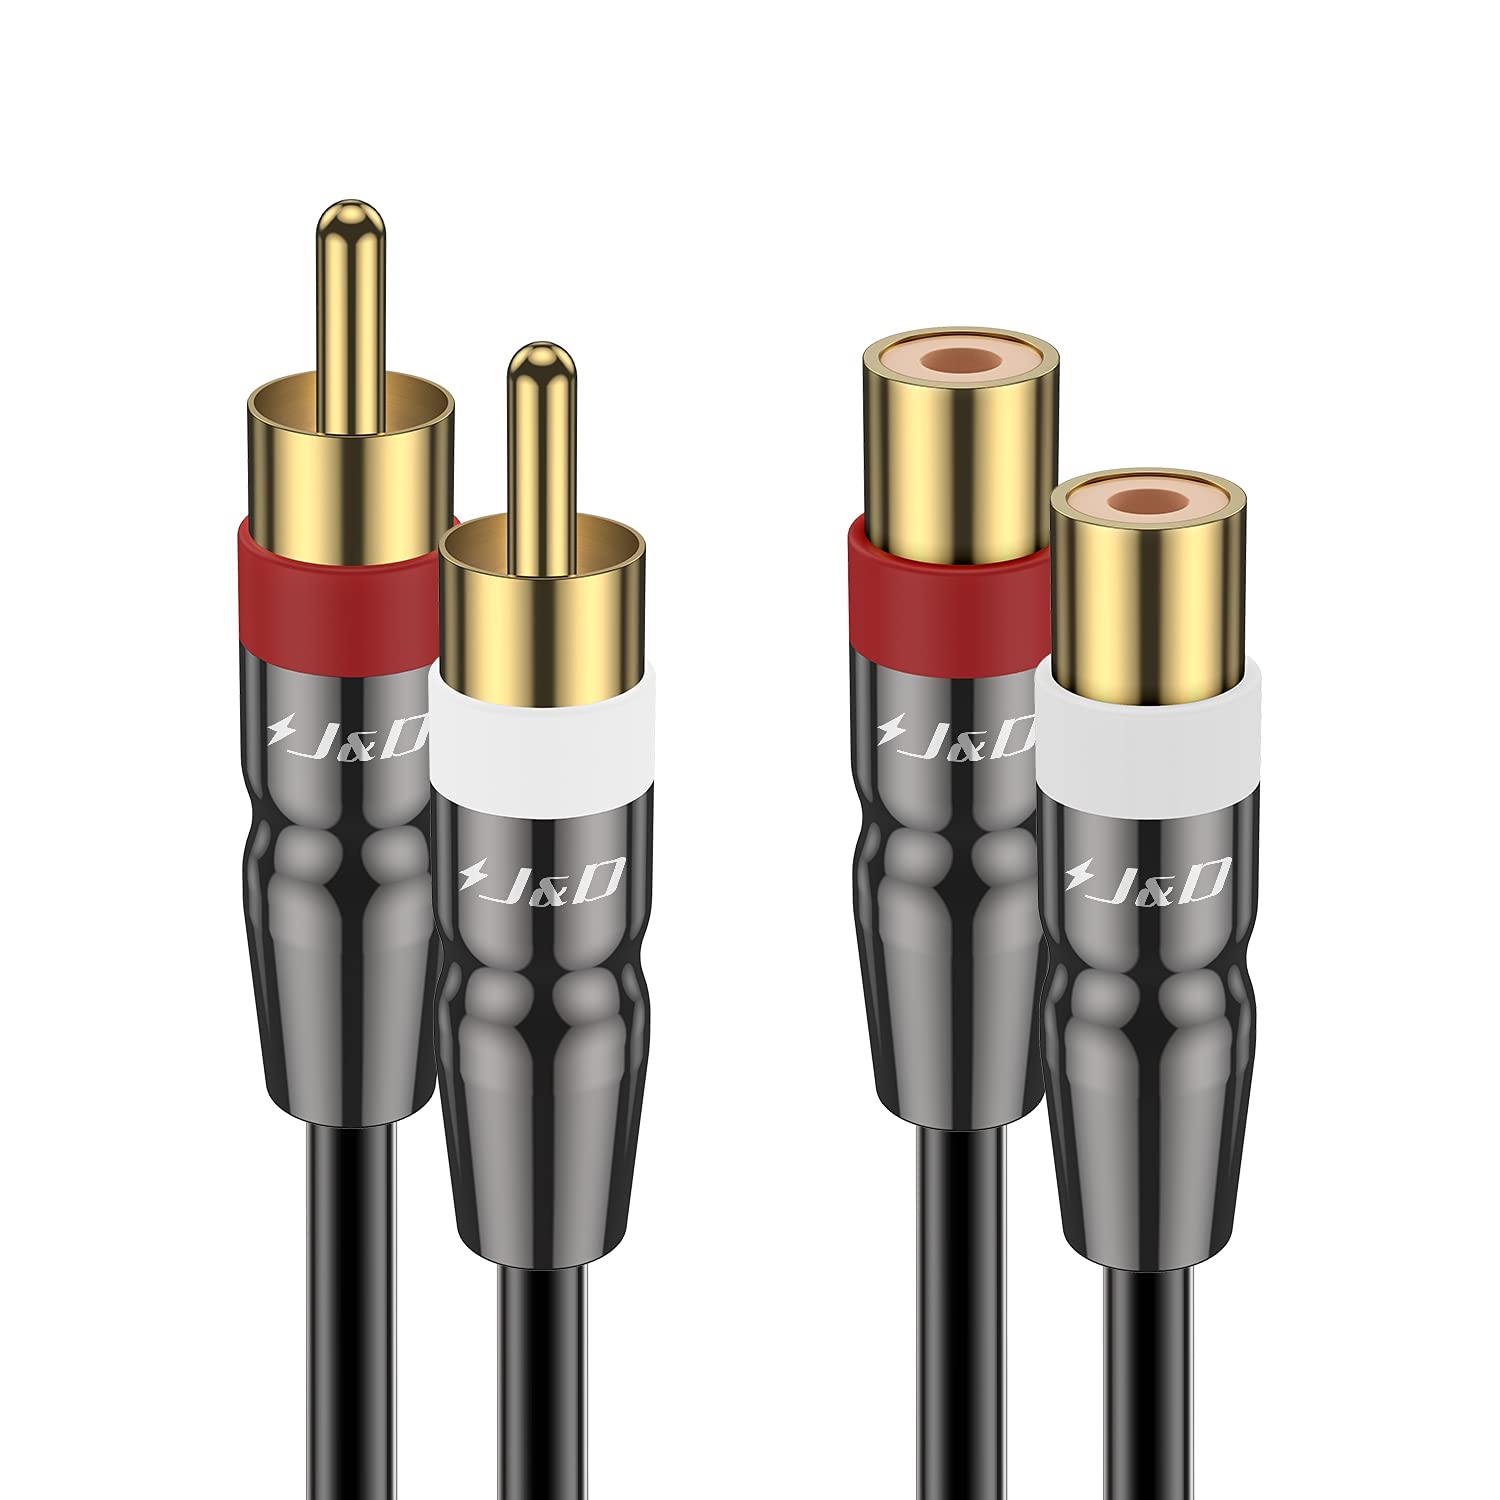 J&D 2 RCA Audio Video Extension Cable Male to Female, Gold-Plated Copper Shell, 15 ft - image 1 of 8